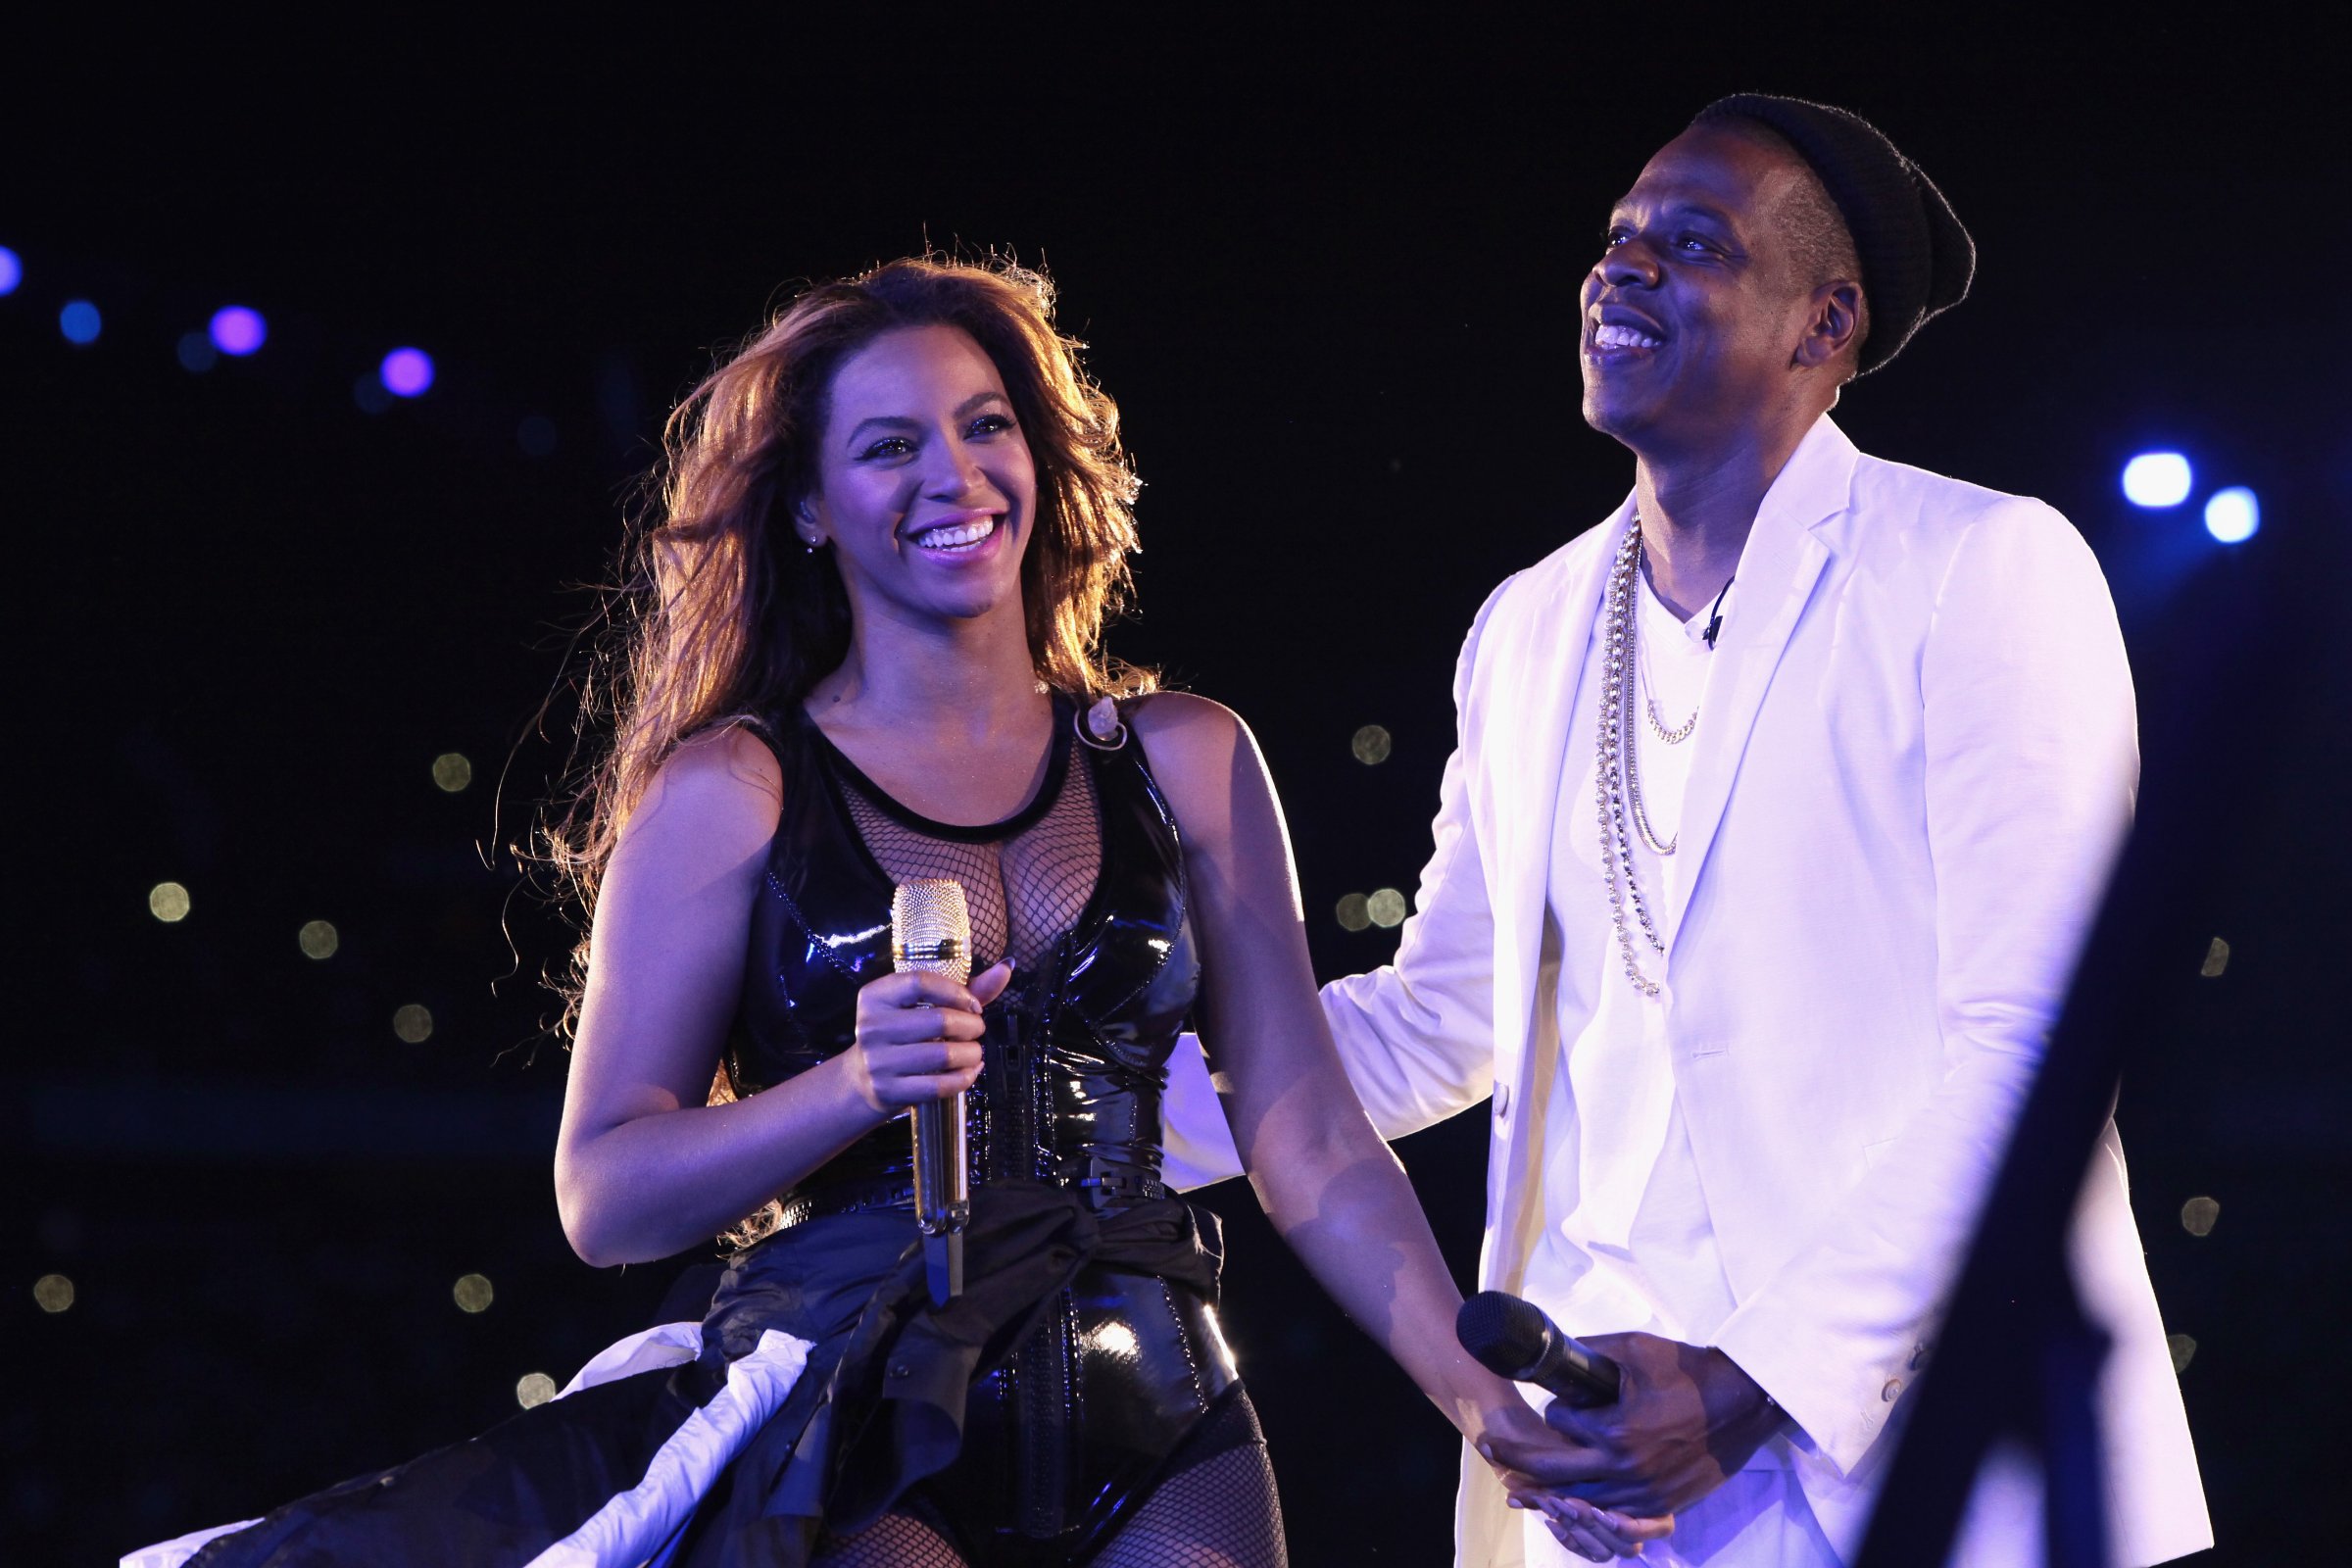 Beyonce and Jay-Z perform during the "On The Run Tour: Beyonce And Jay-Z" at the Stade de France on Sept. 12, 2014 in Paris.